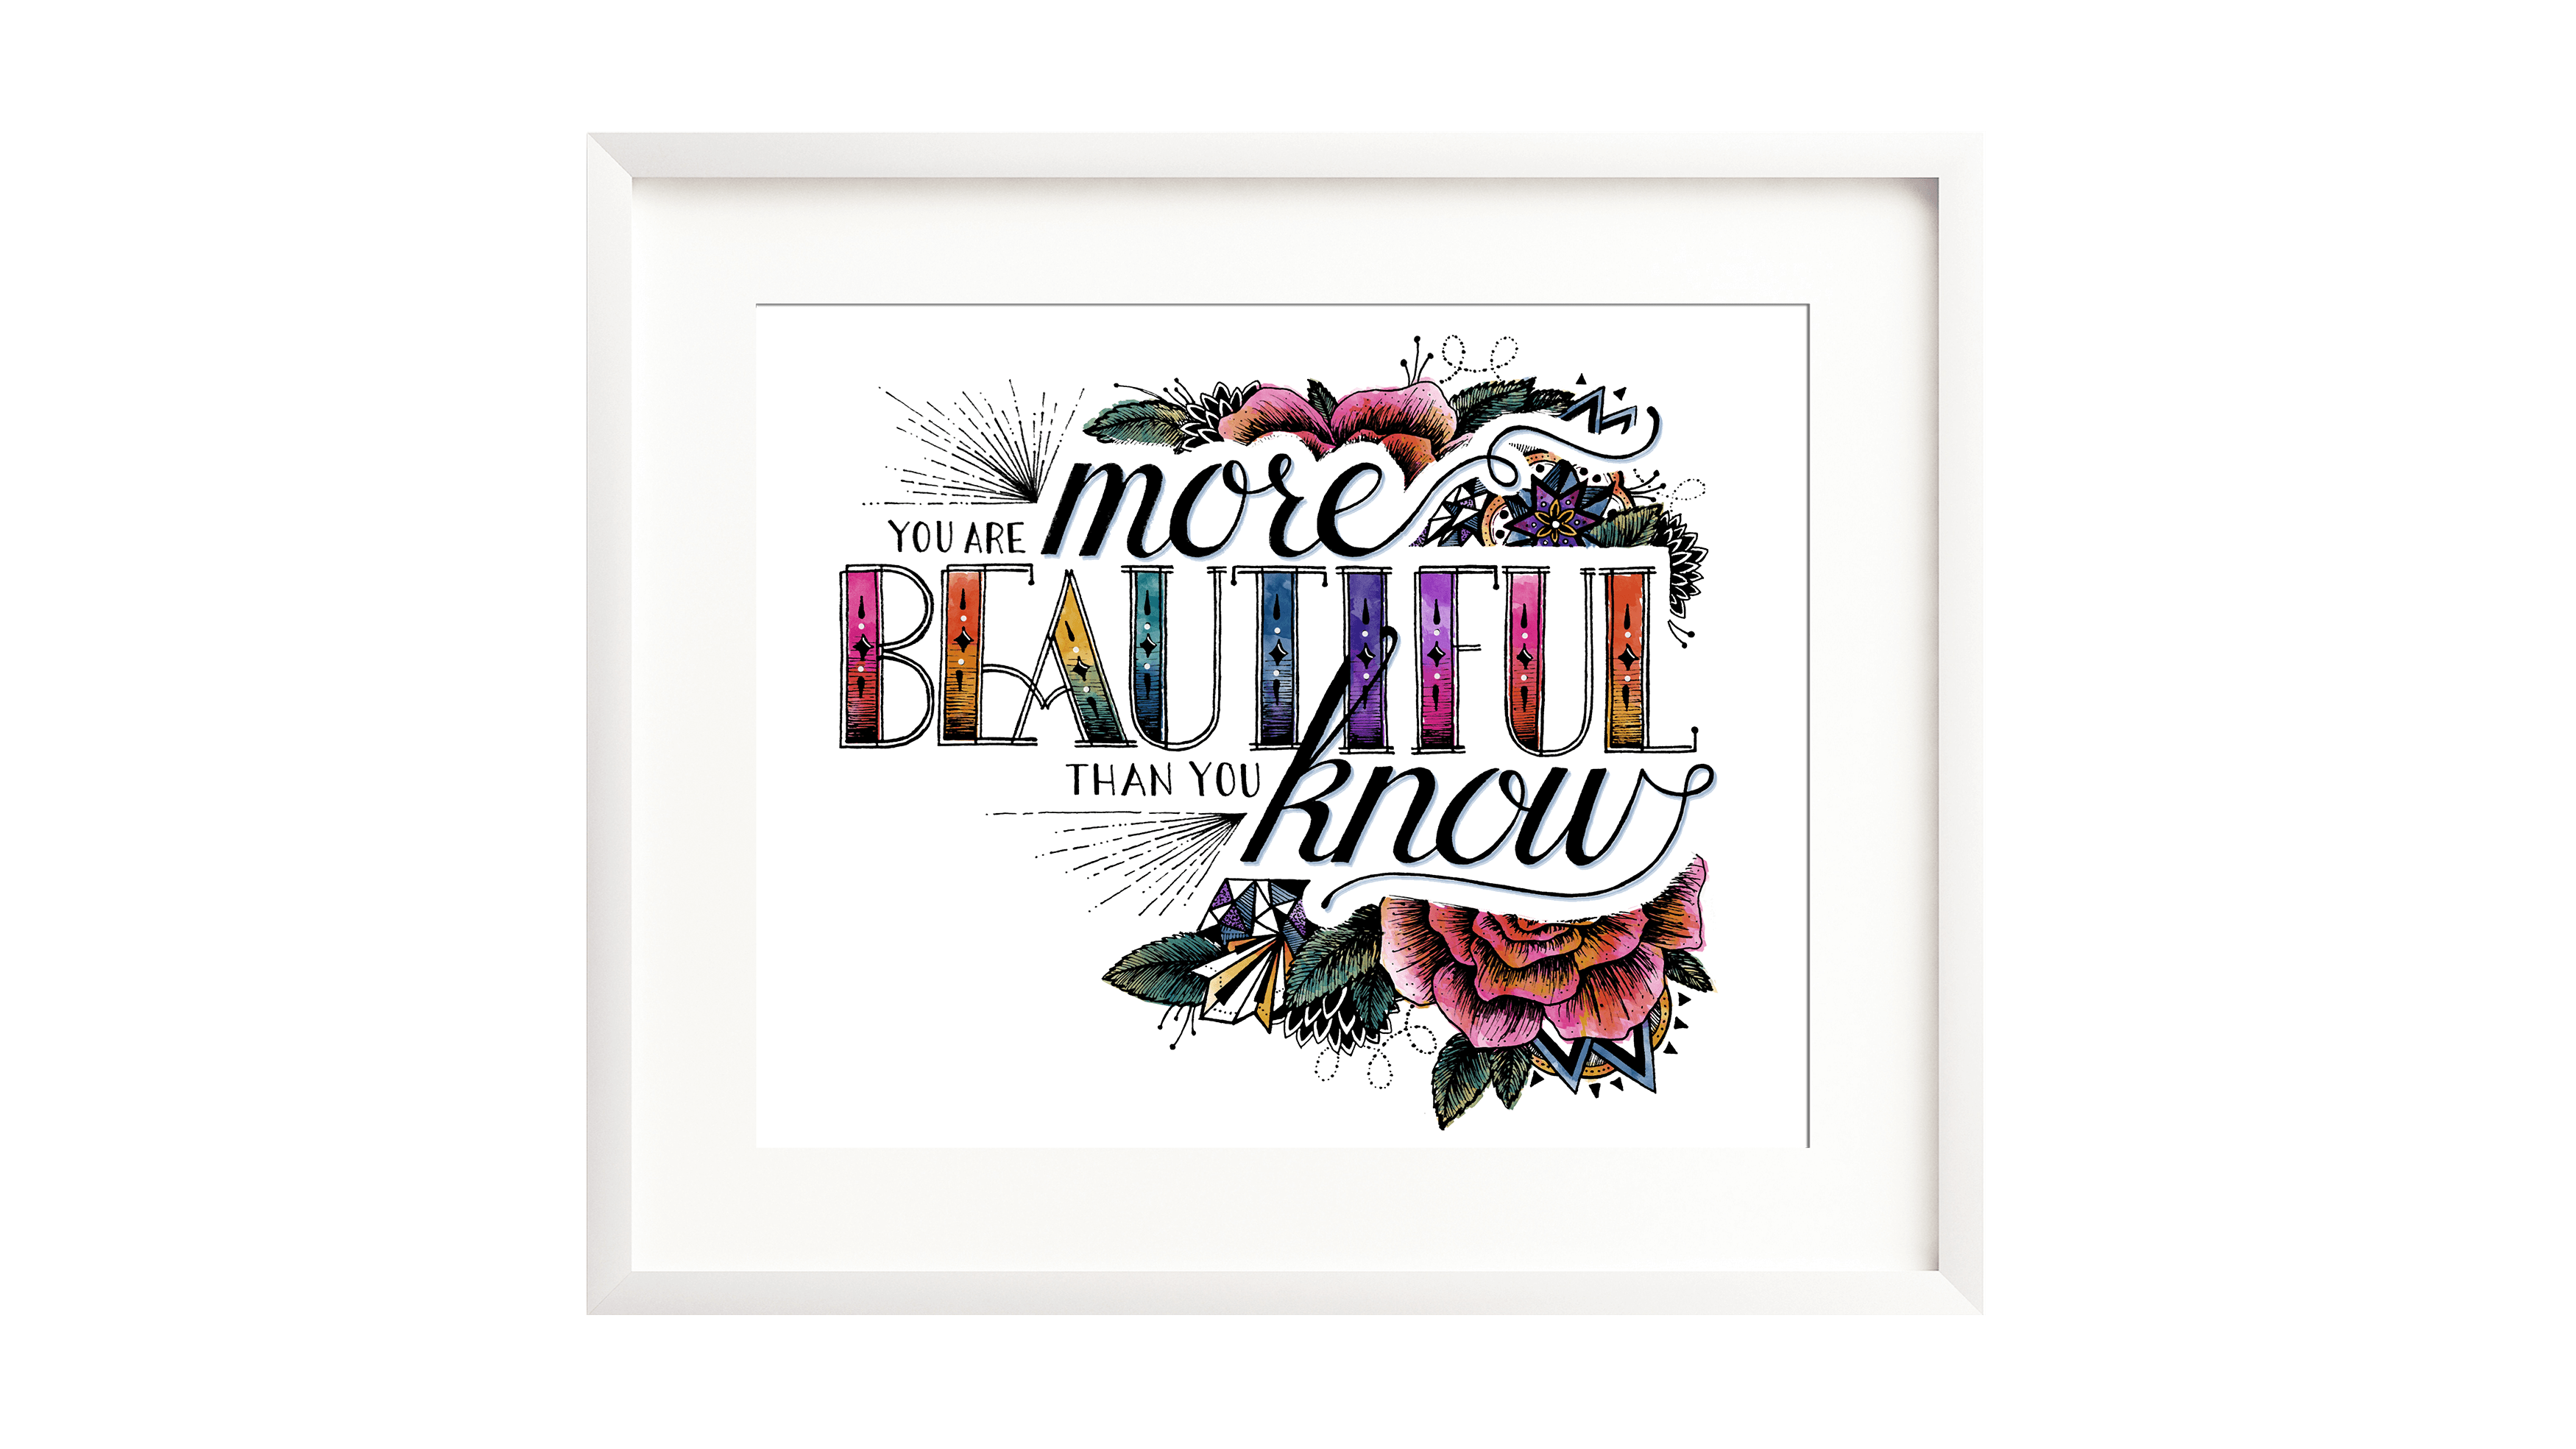 You are More Beautiful Than You Know - Seedling Press